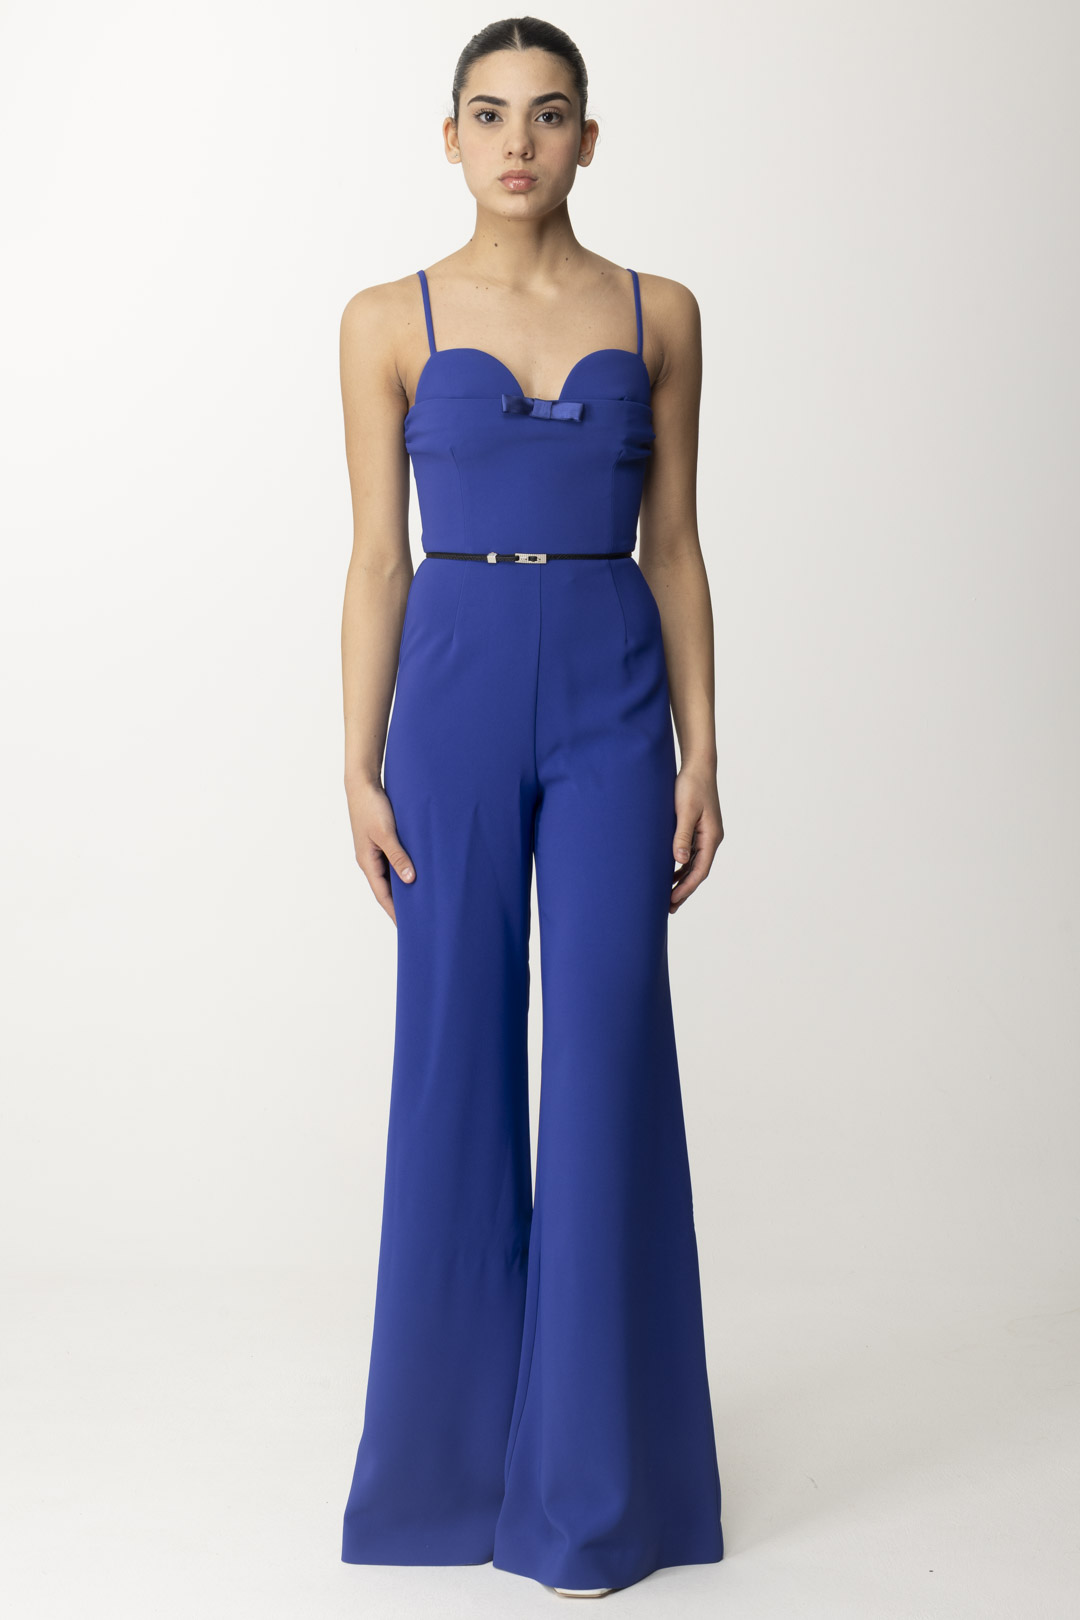 Preview: Elisabetta Franchi Satin Bow Jumpsuit with Strap BLUE INDACO